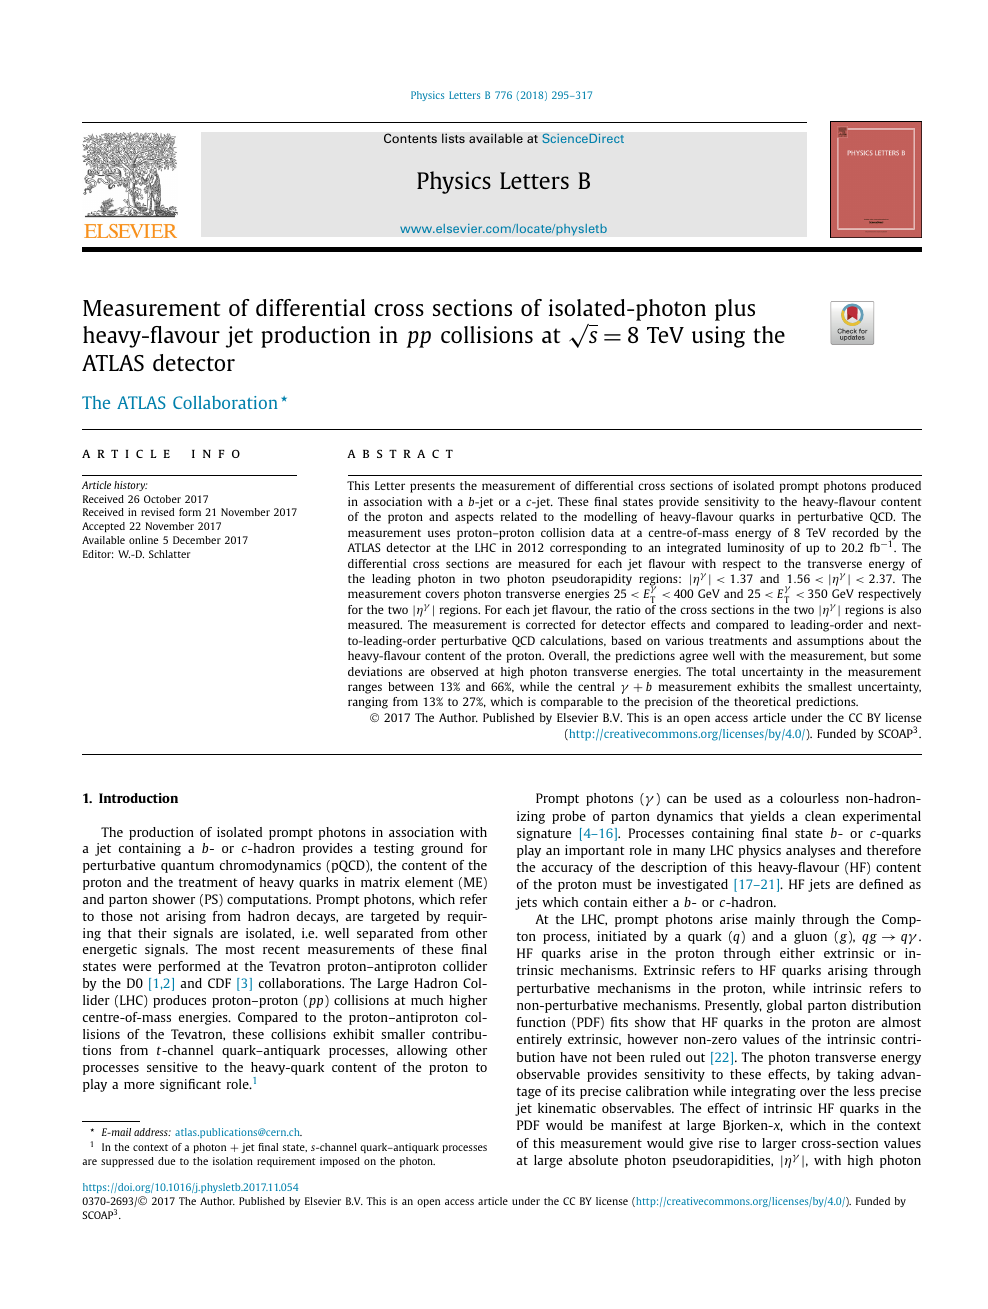 Measurement Of Differential Cross Sections Of Isolated Photon Plus Heavy Flavour Jet Production In Pp Collisions At S 8 Tev Using The Atlas Detector Topic Of Research Paper In Physical Sciences Download Scholarly Article